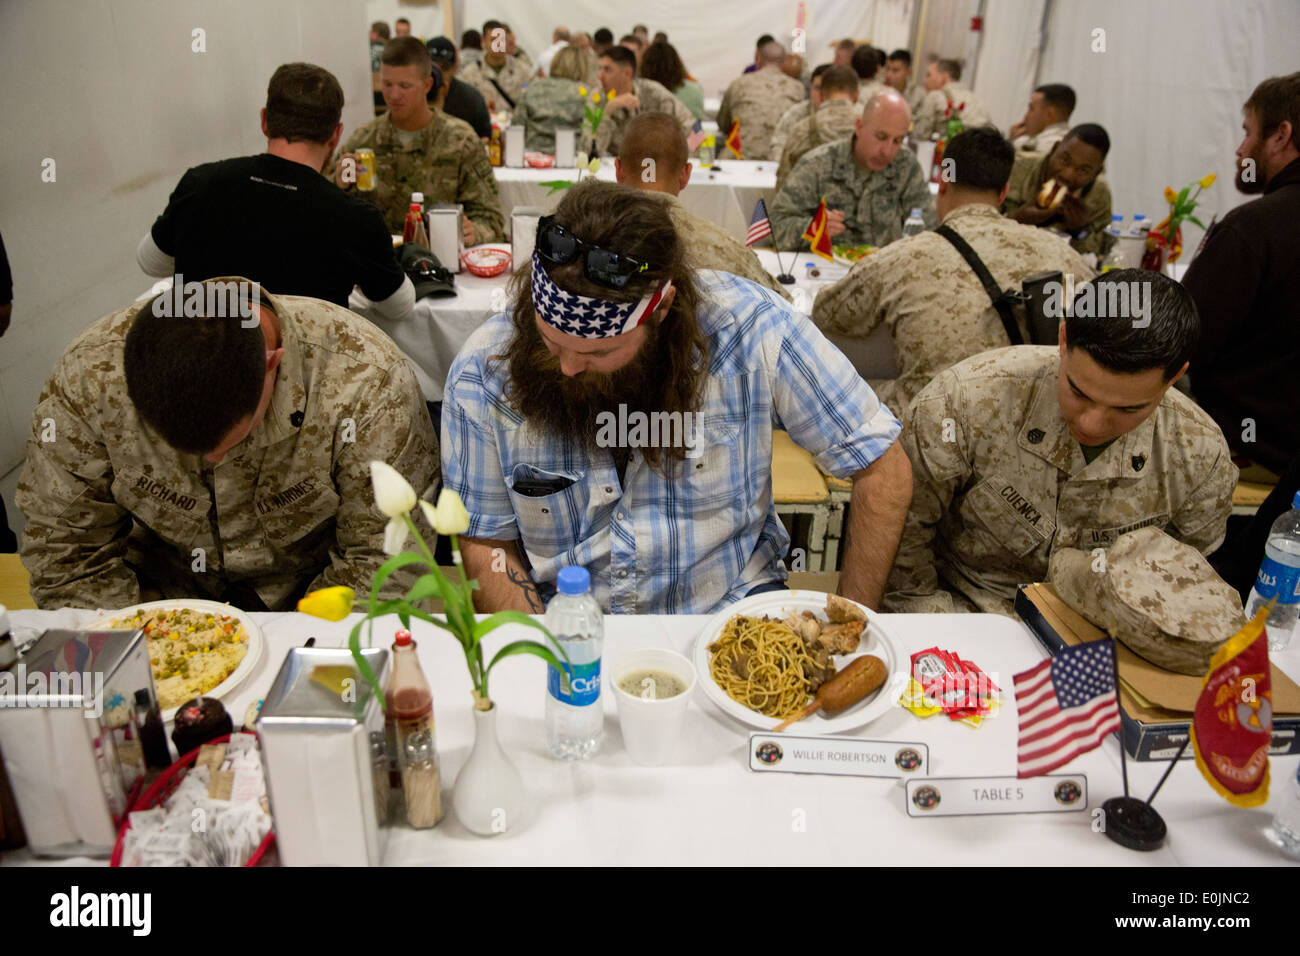 U.S. Marines with Regional Command (Southwest) pray with Willie Robertson, an actor, before a meal in the dining facility at Ca Stock Photo